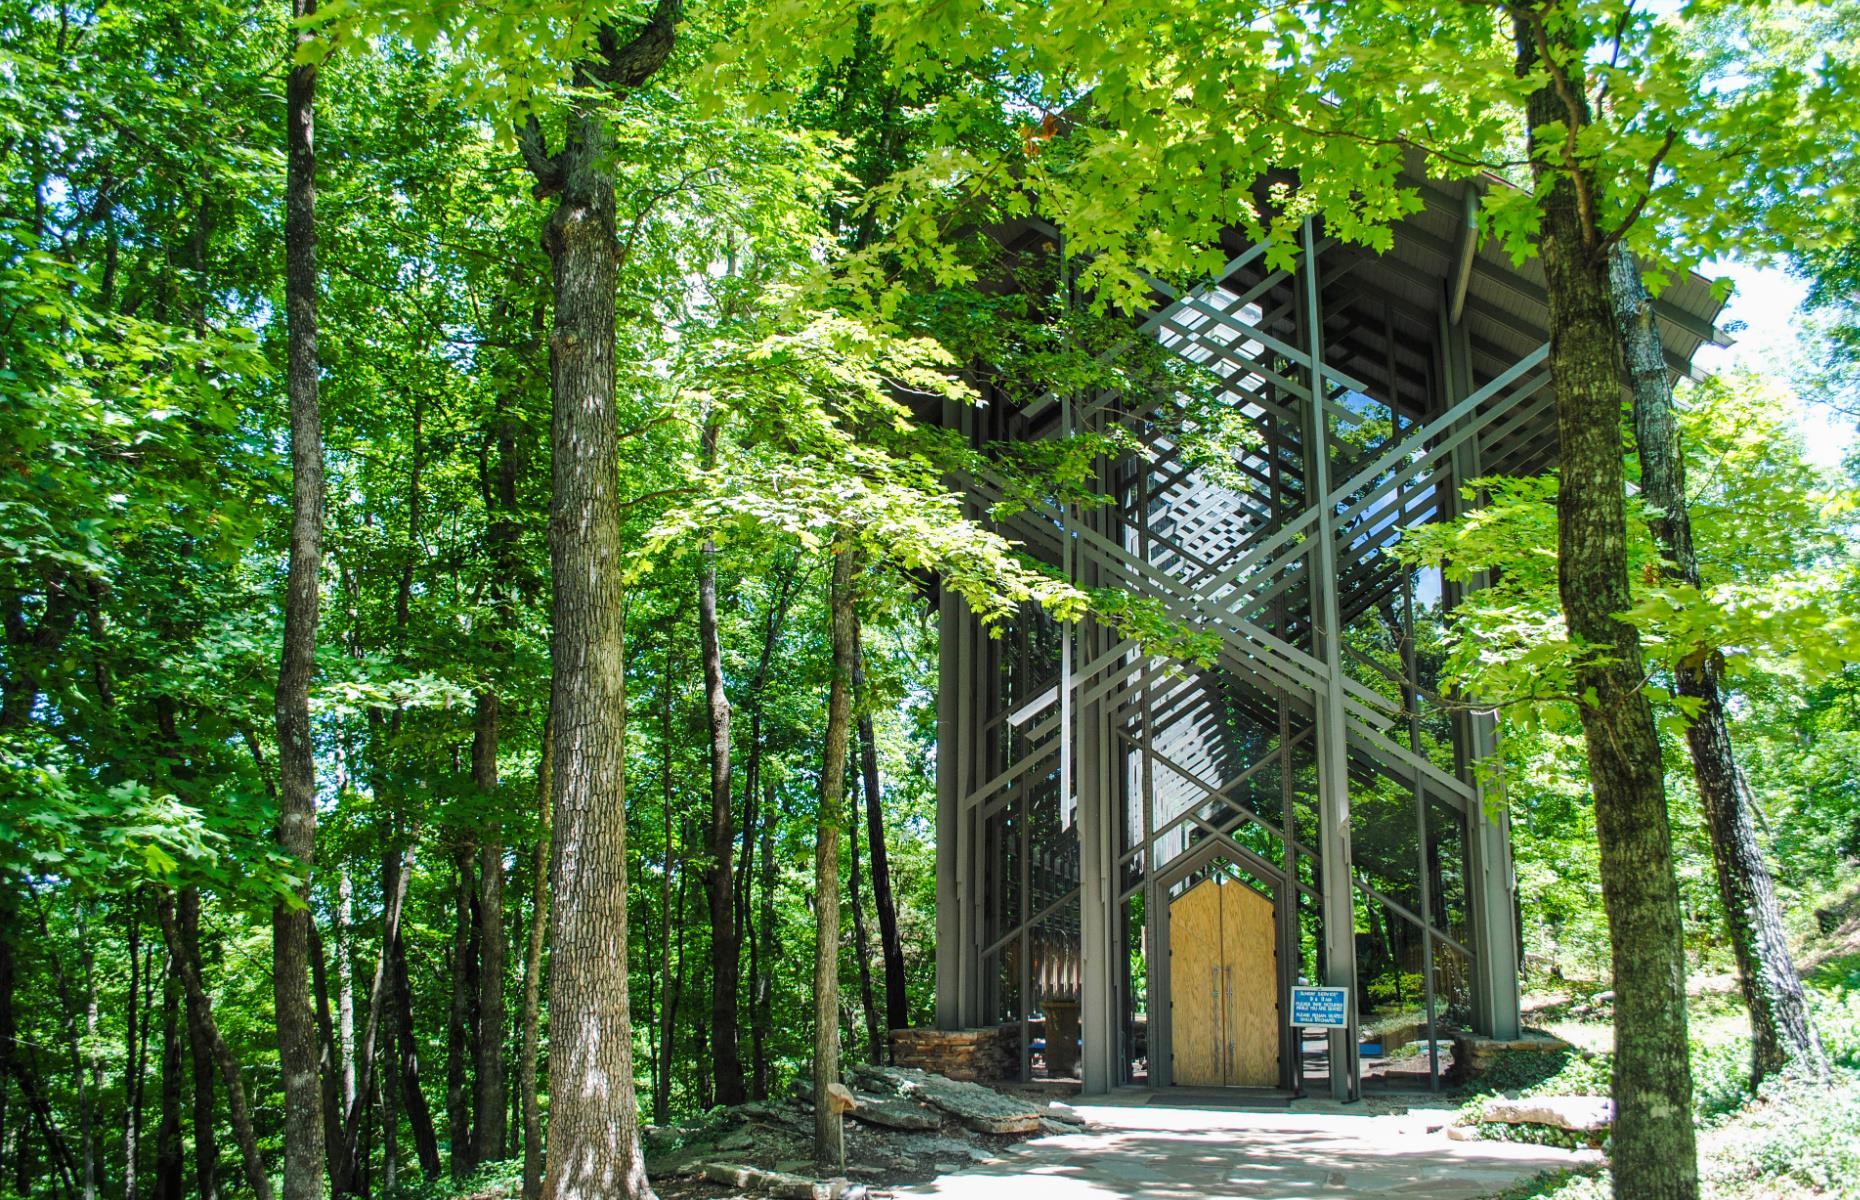 <p>Architect E. Fay Jones designed a series of glass chapels that are hidden in the forests of Arkansas including <a href="https://thorncrown.com/">this beauty</a> near Eureka Springs, which first opened in 1980. With 425 windows, the little church blends in with its natural surroundings, giving visitors a spiritual experience, no matter what their religious affiliation may be. Sunday services are held from April through to October.</p>  <p><strong><a href="https://www.loveexploring.com/galleries/110731/the-most-beautiful-sacred-and-spiritual-sites-in-the-world">Discover the world's most beautiful sacred and spiritual sites</a></strong></p>